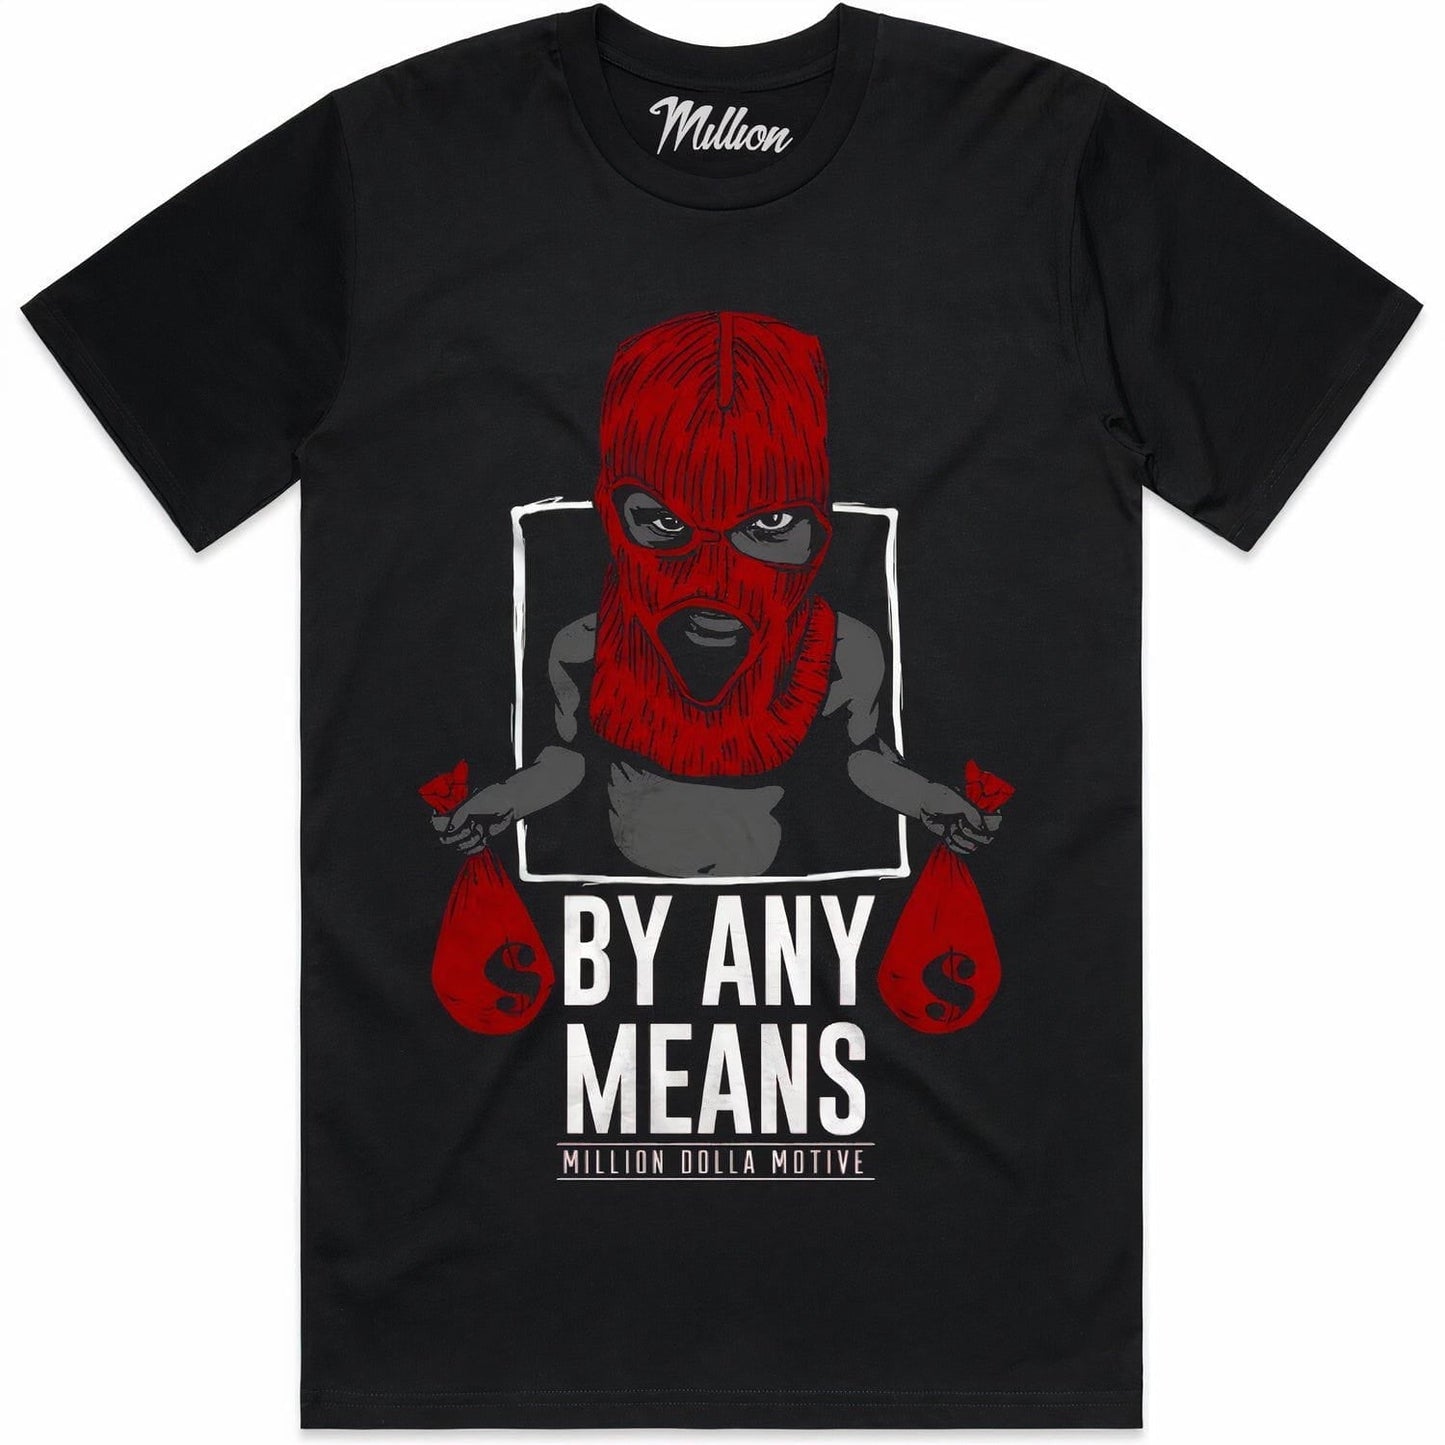 Jordan 2 Black Cement 2s | Sneaker Tees | Shirt to Match | By Any Mean